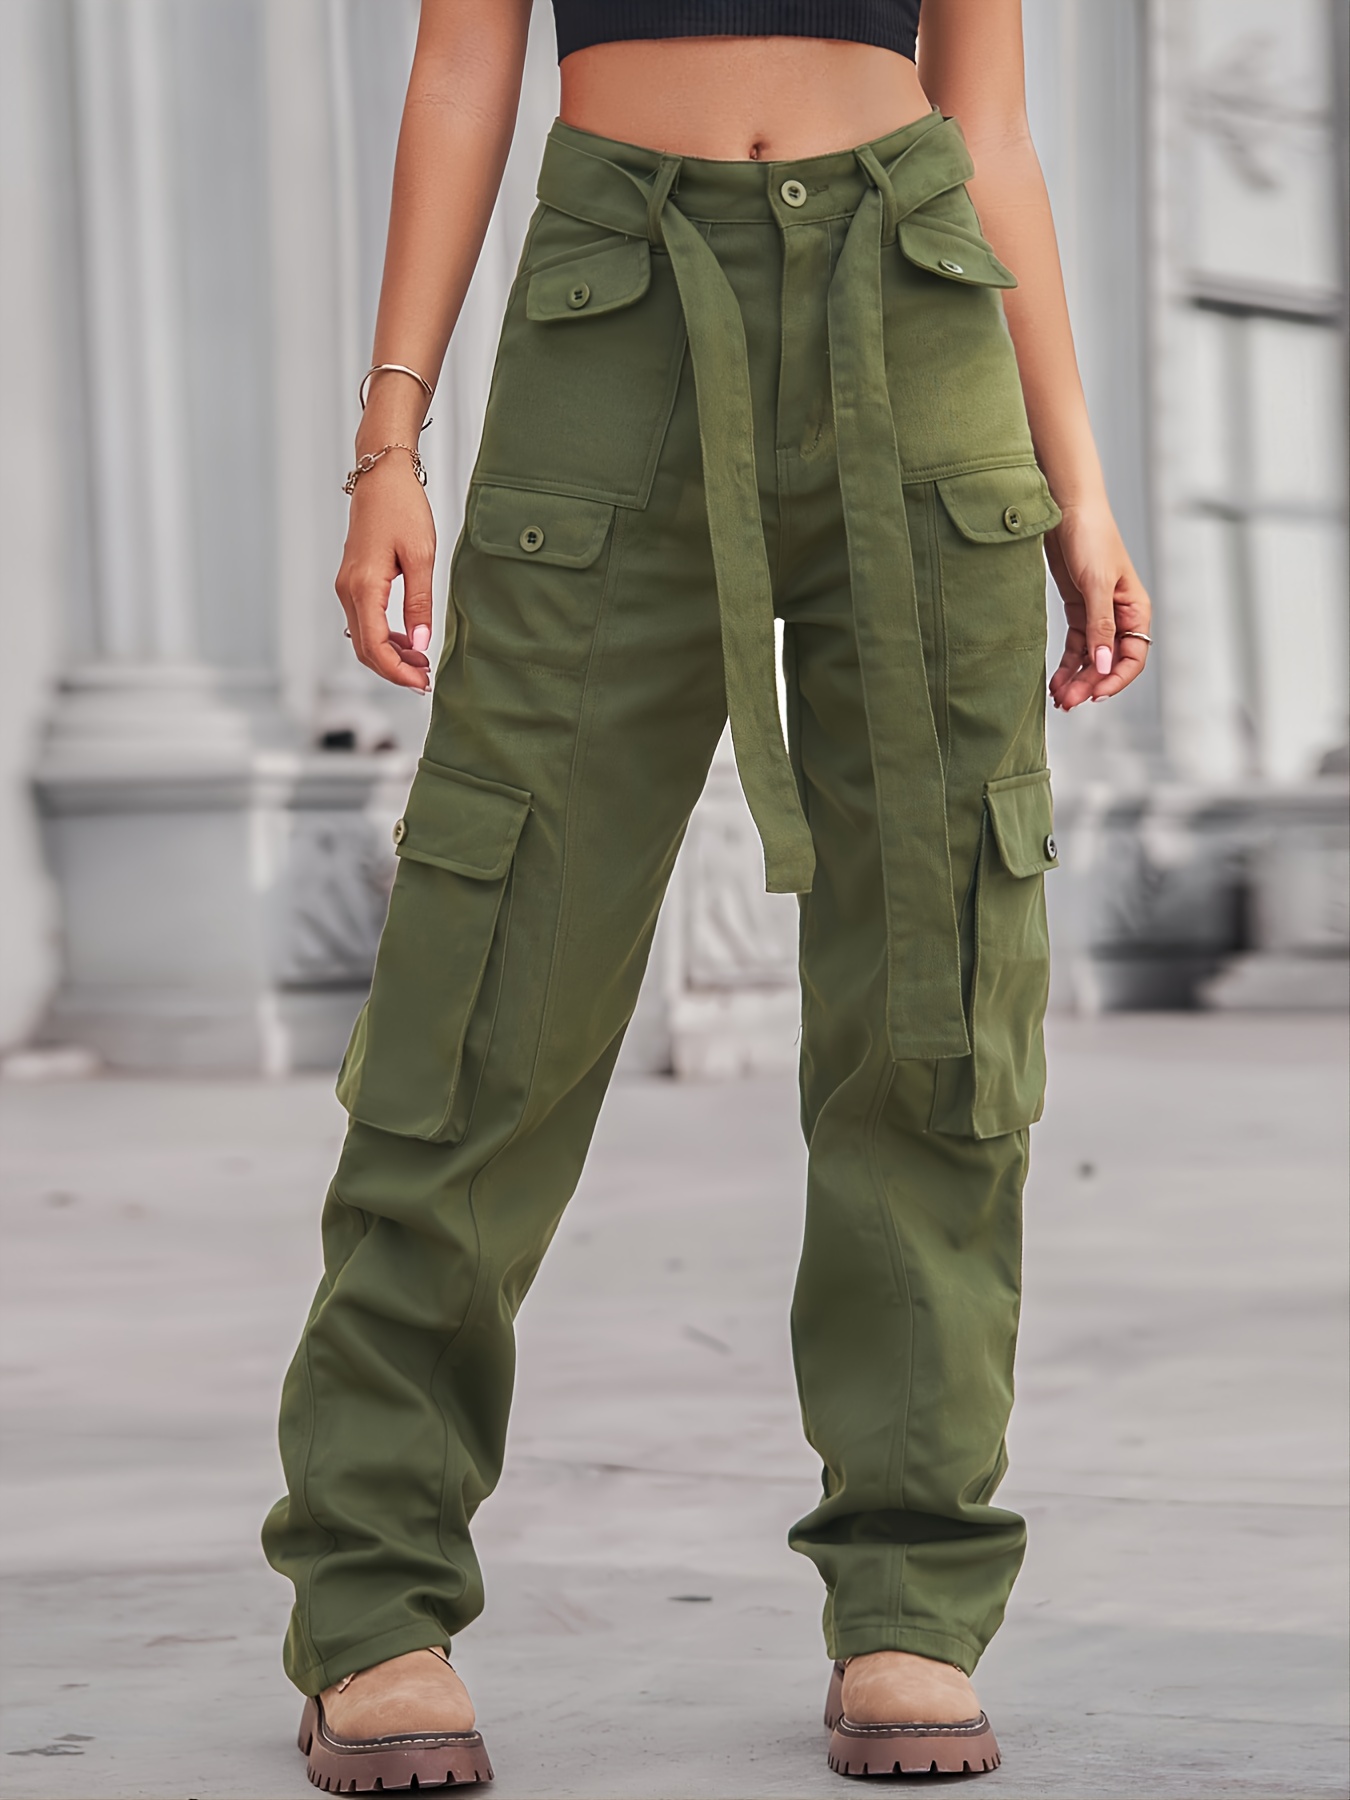 Army Green Multi-Pocket Cargo Jeans